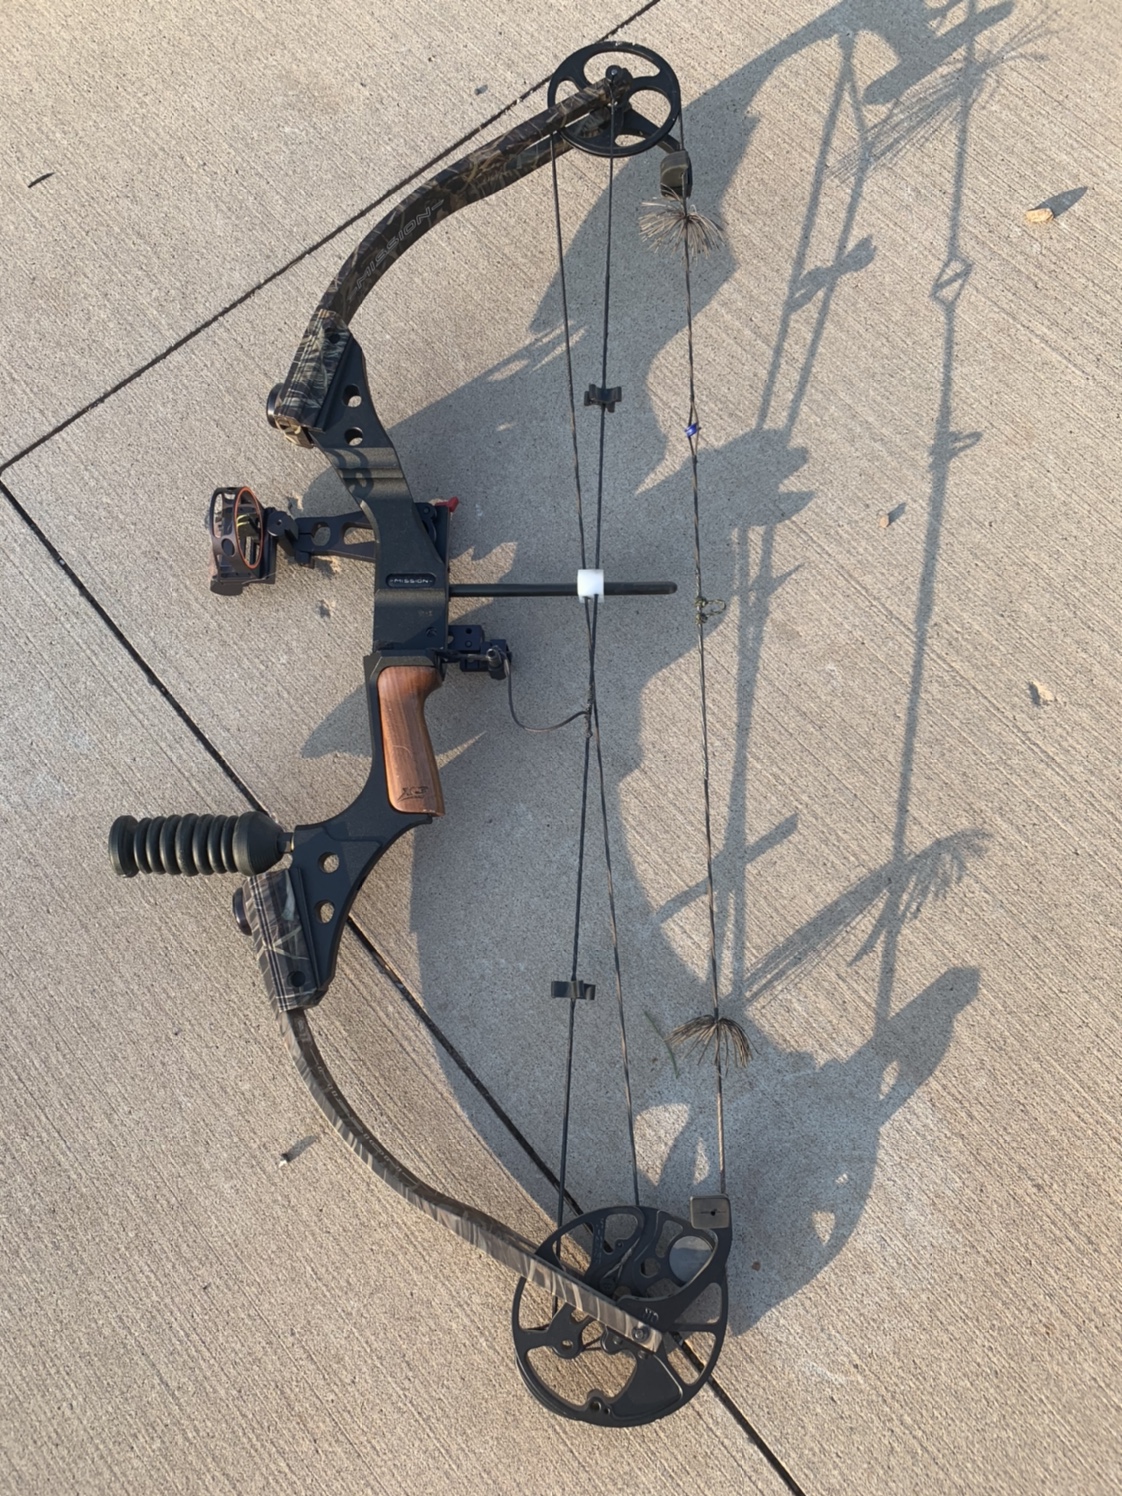 Mission Compound Bow - Classifieds - Buy, Sell, Trade or Rent - Lake  Ontario United - Lake Ontario's Largest Fishing & Hunting Community - New  York and Ontario Canada